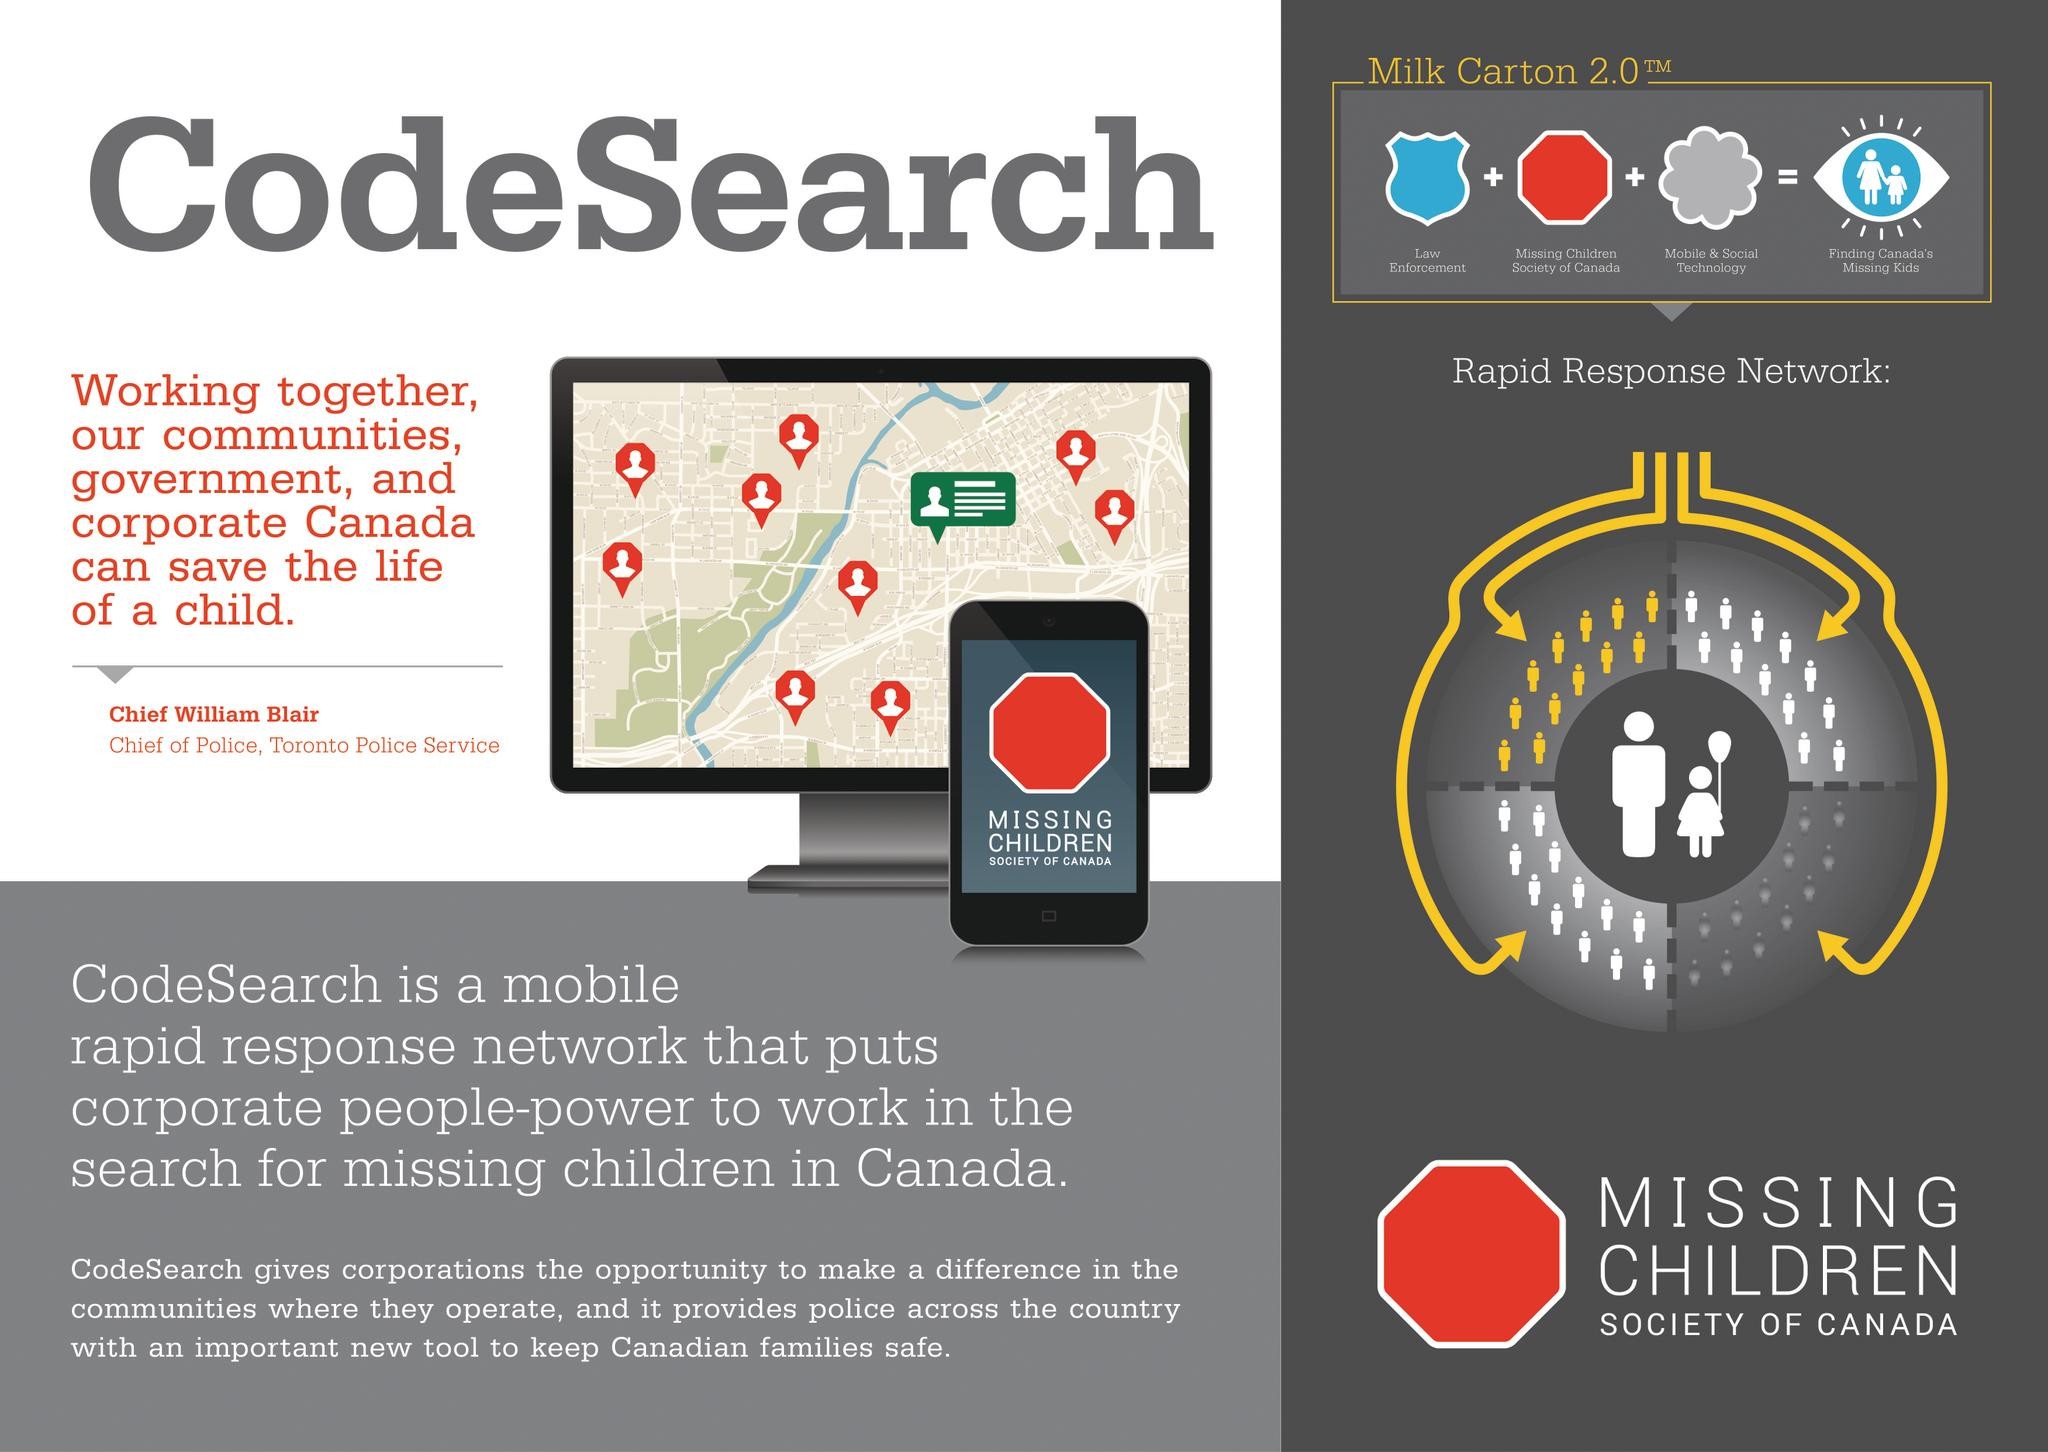 CODESEARCH MOBILE RAPID RESPONSE NETWORK